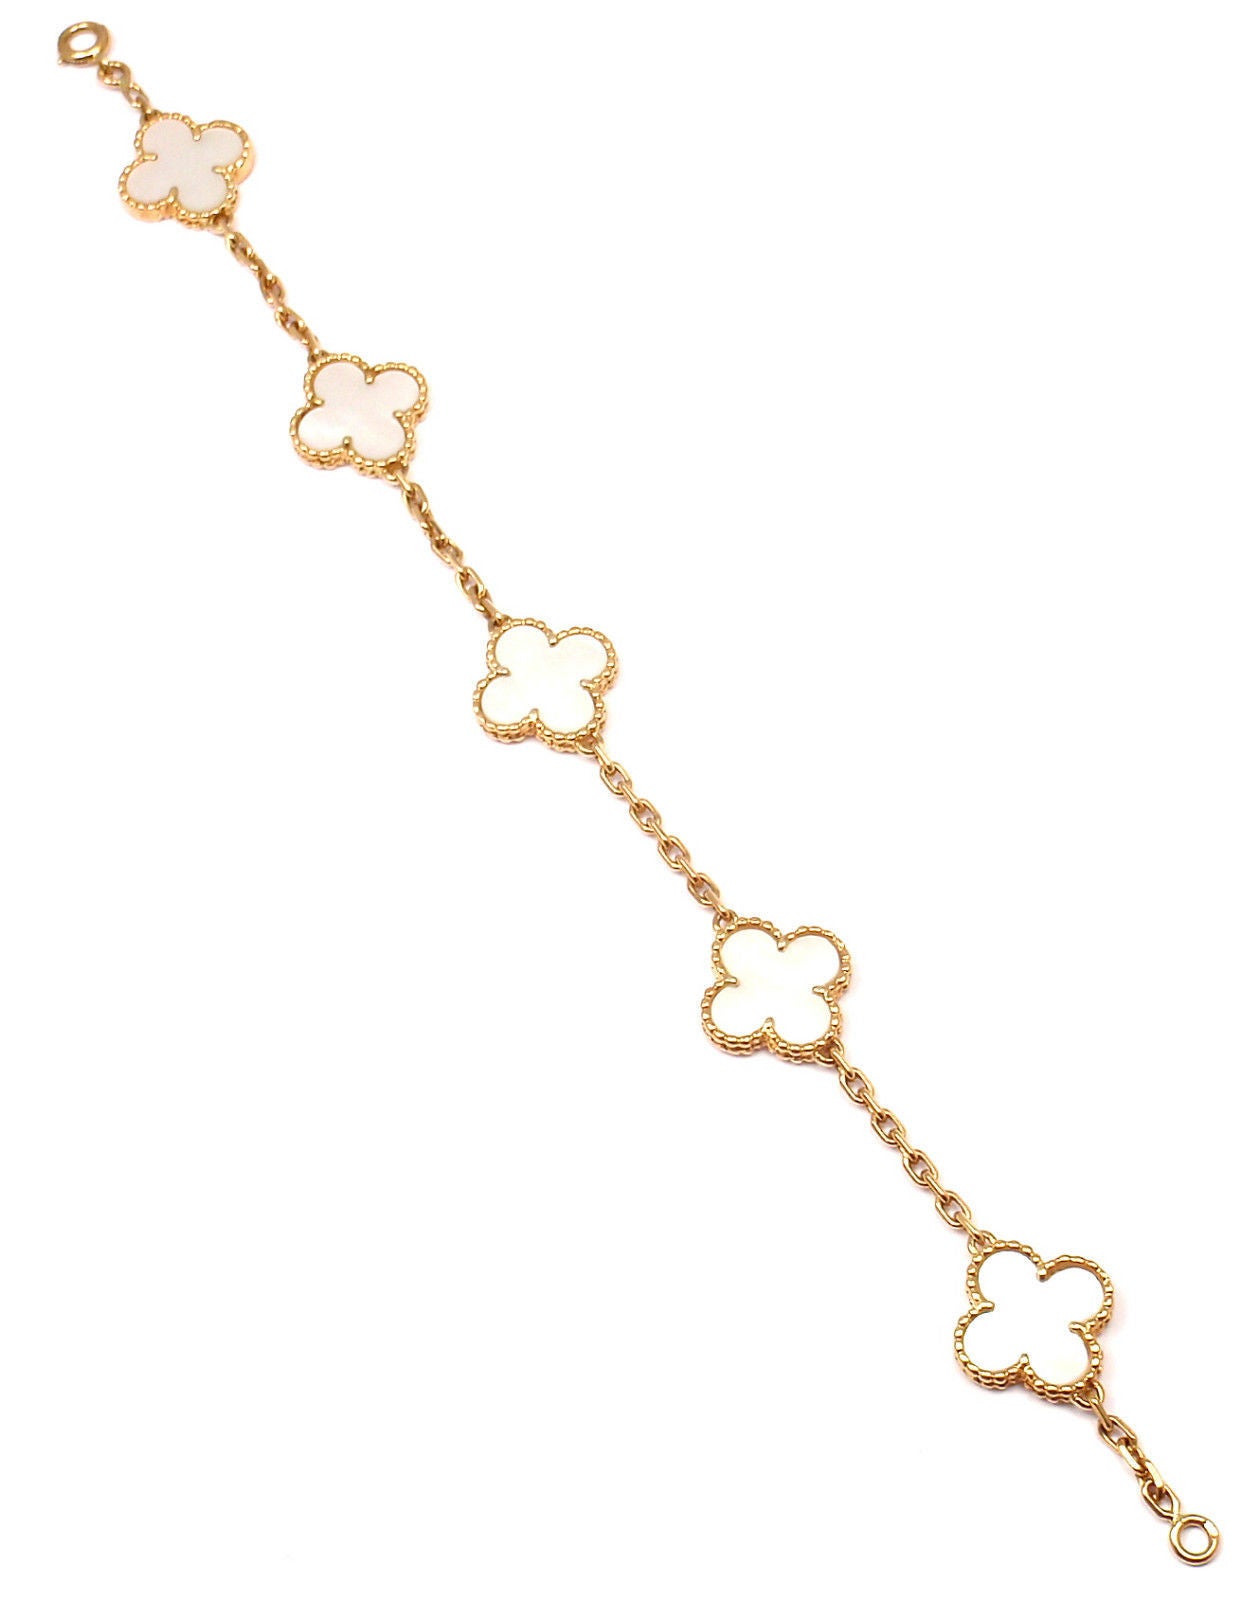 18k Yellow Gold 5-Motif Mother of Pearl Bracelet by Van Cleef & Arples. 
Part of VCA's absolutely stunning 